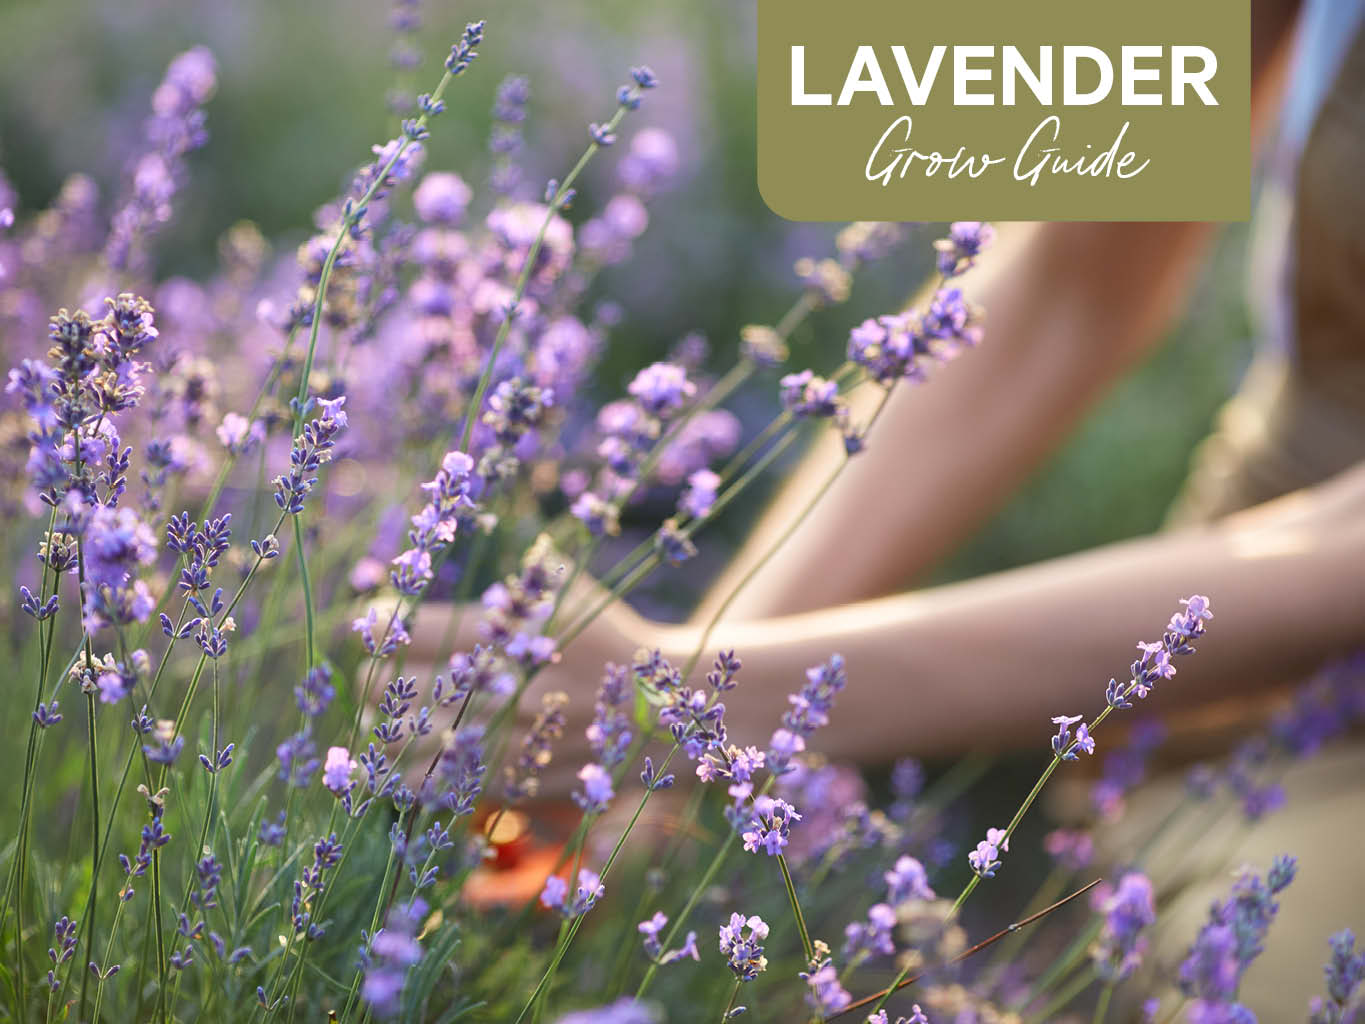 How to Care for and Harvest Lavender Plants - Dengarden